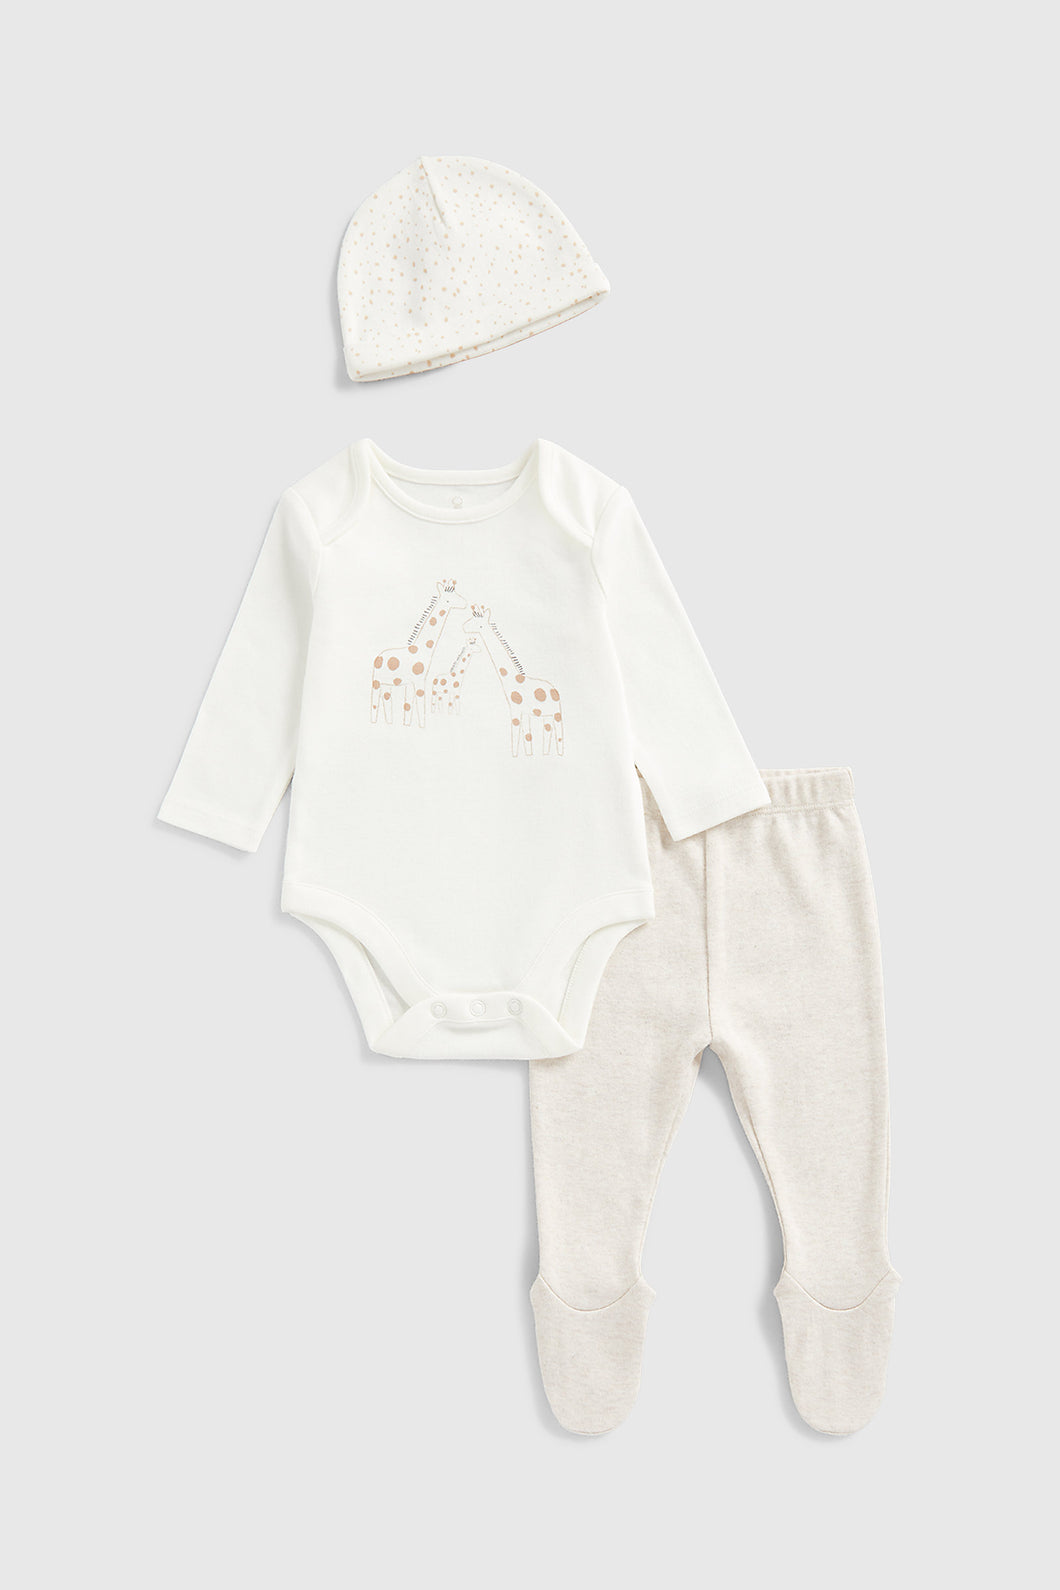 Mothercare Giraffe 3-Piece Baby Outfit Set